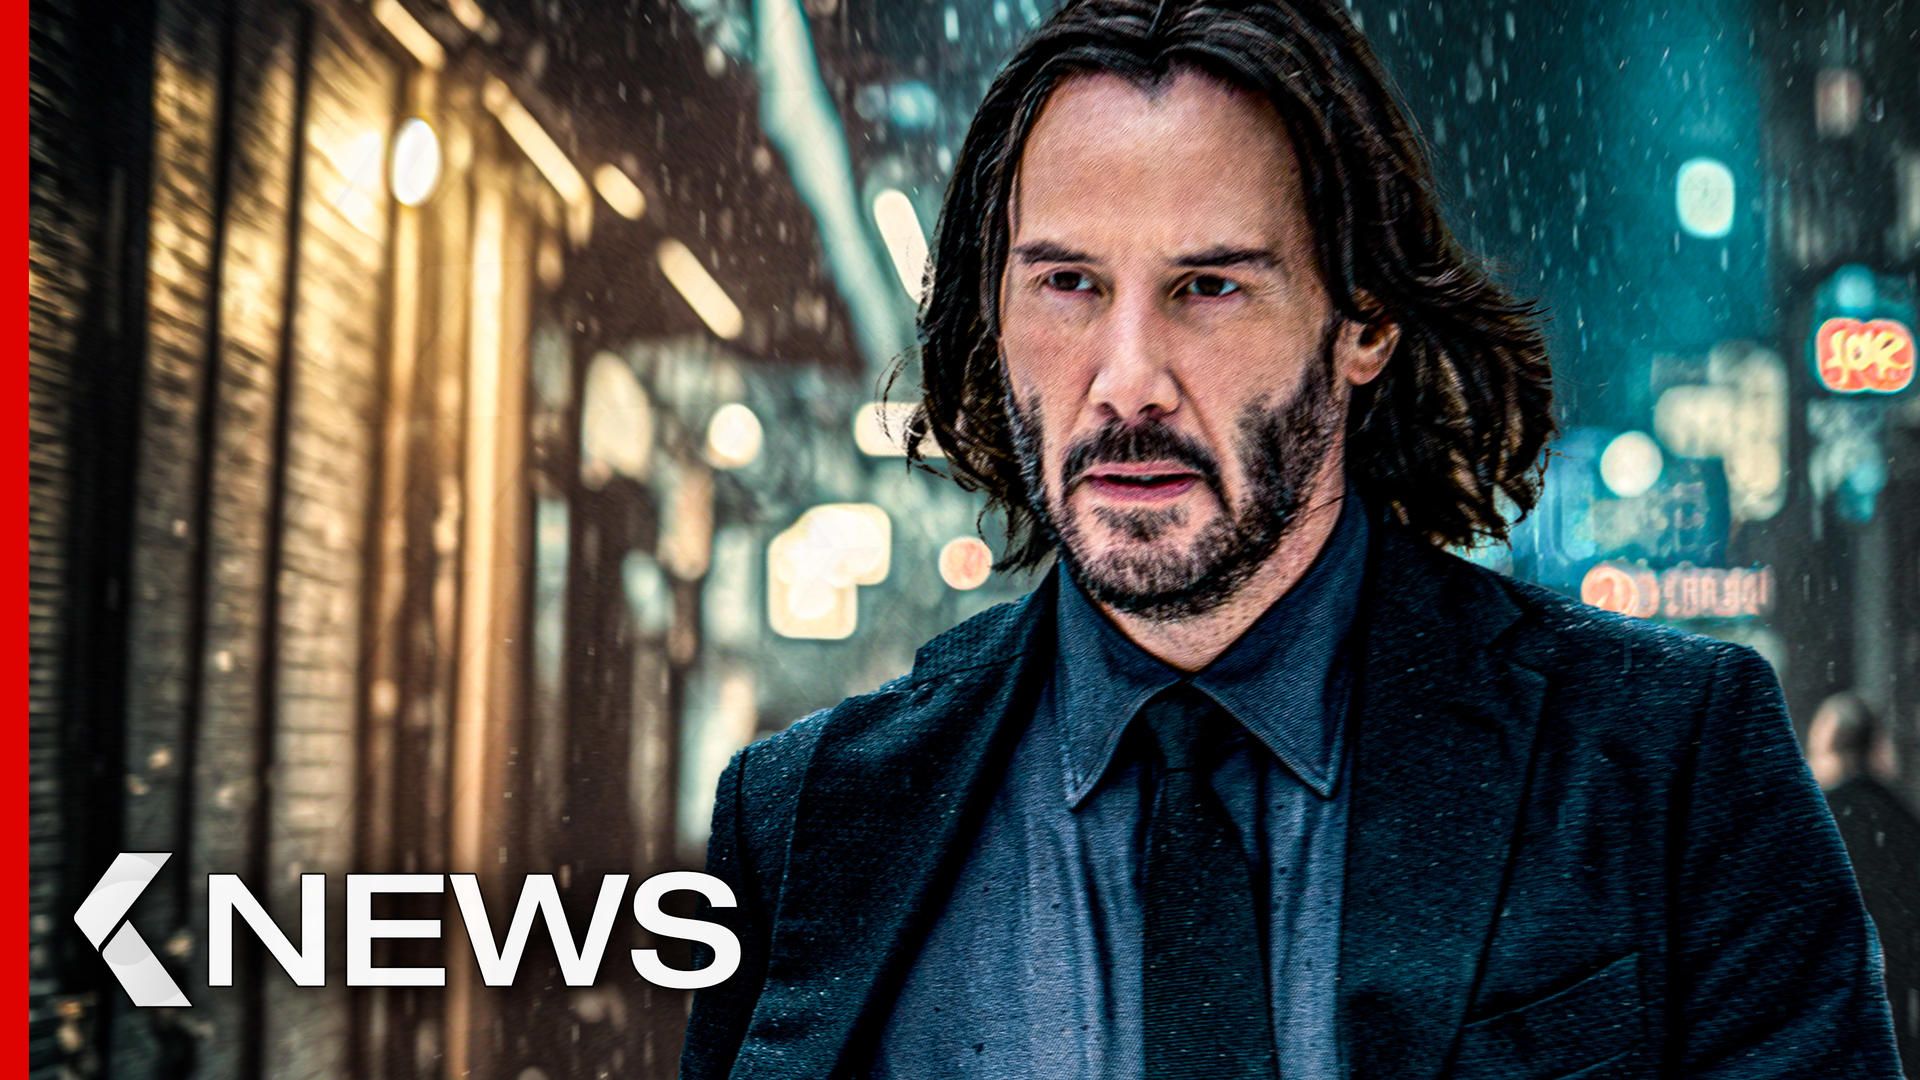 REPORT: 'John Wick 5' Confirmed, Being Filmed Back-to-Back With No. 4